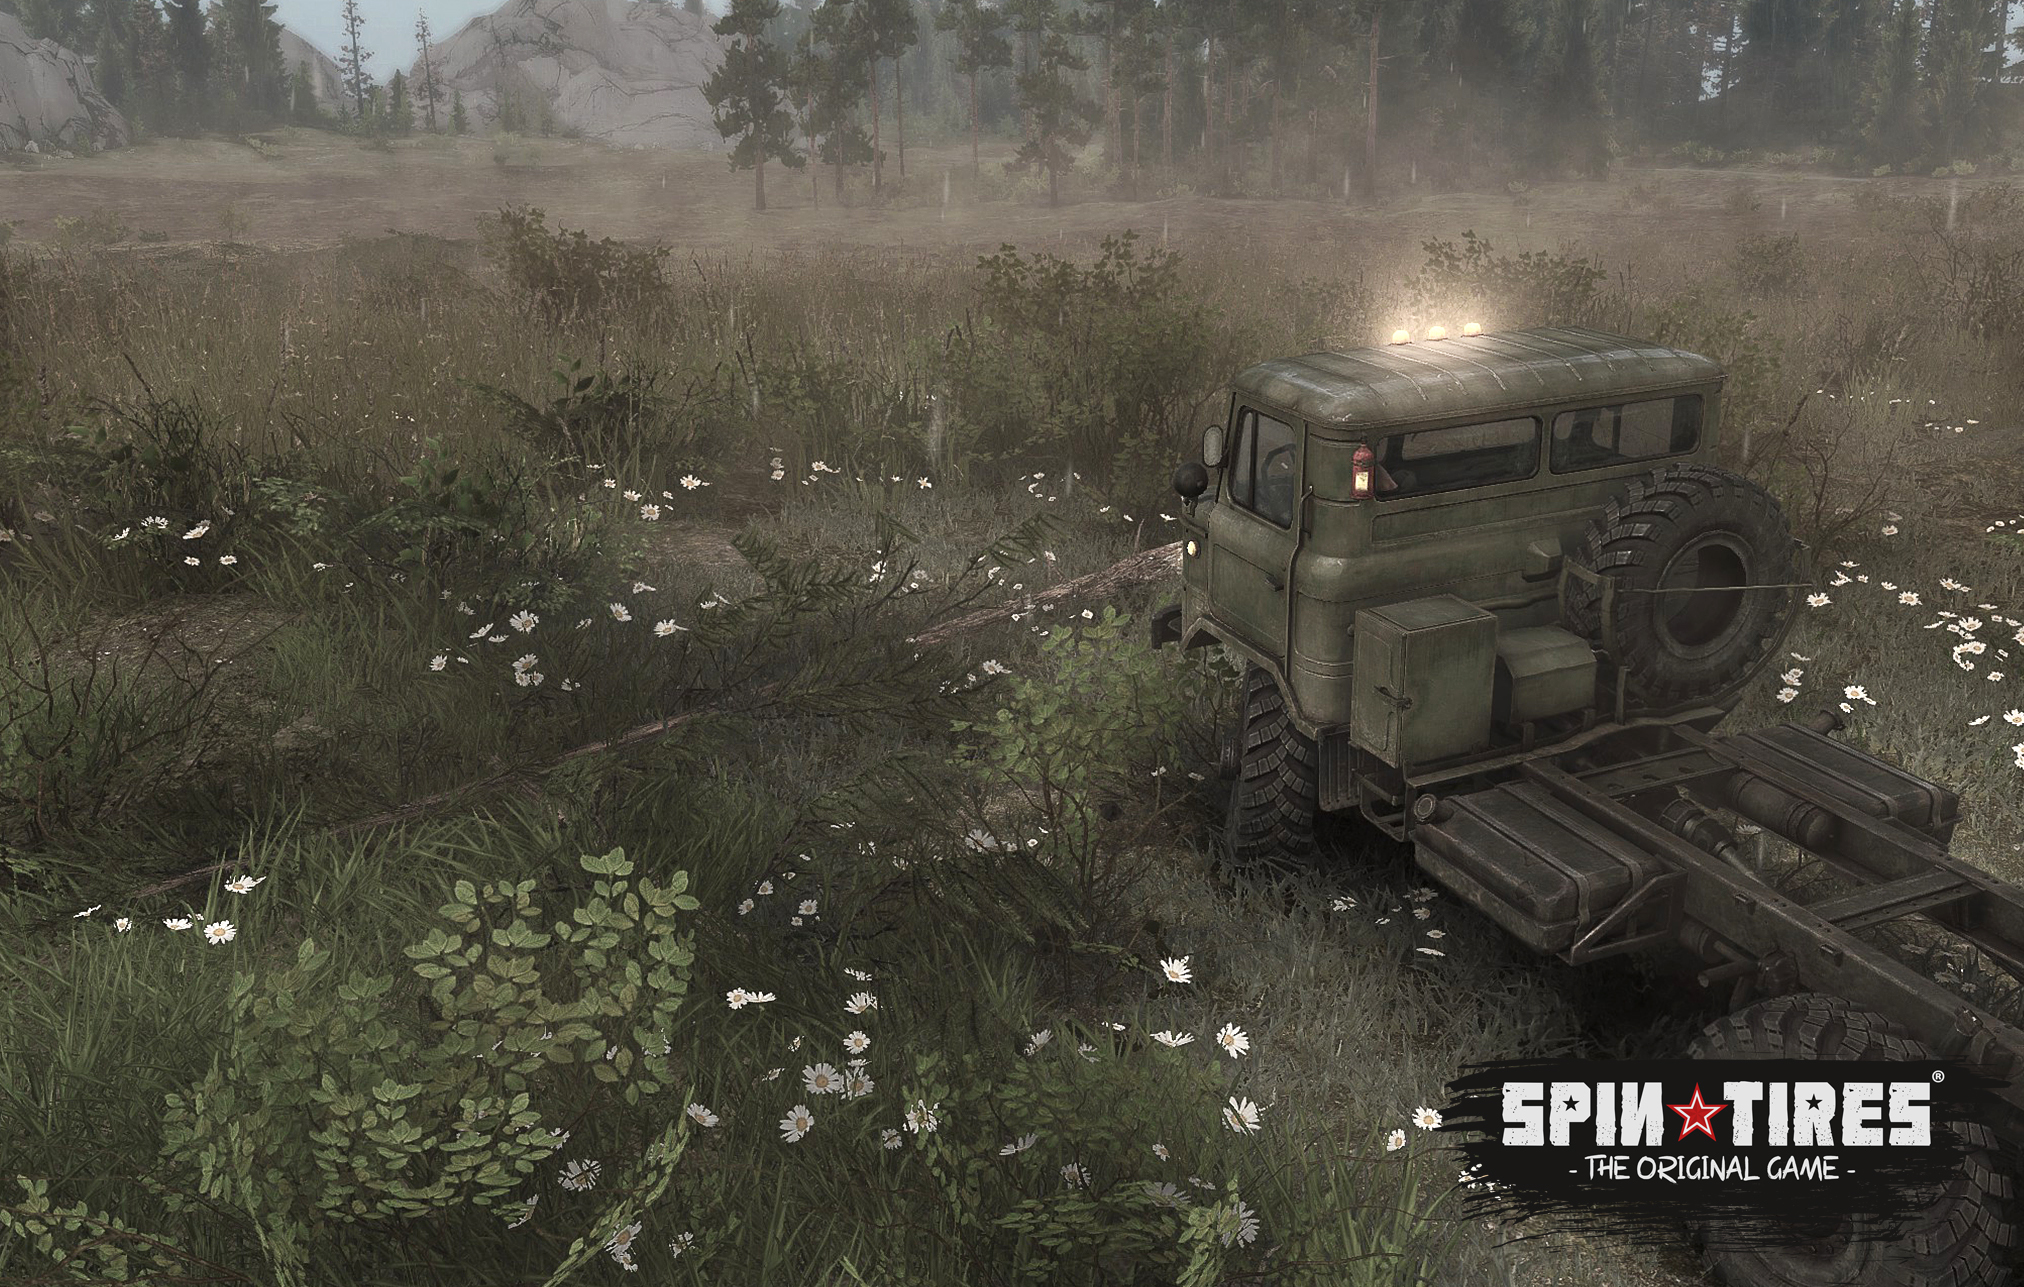 Spintires the original game. Willor игра.